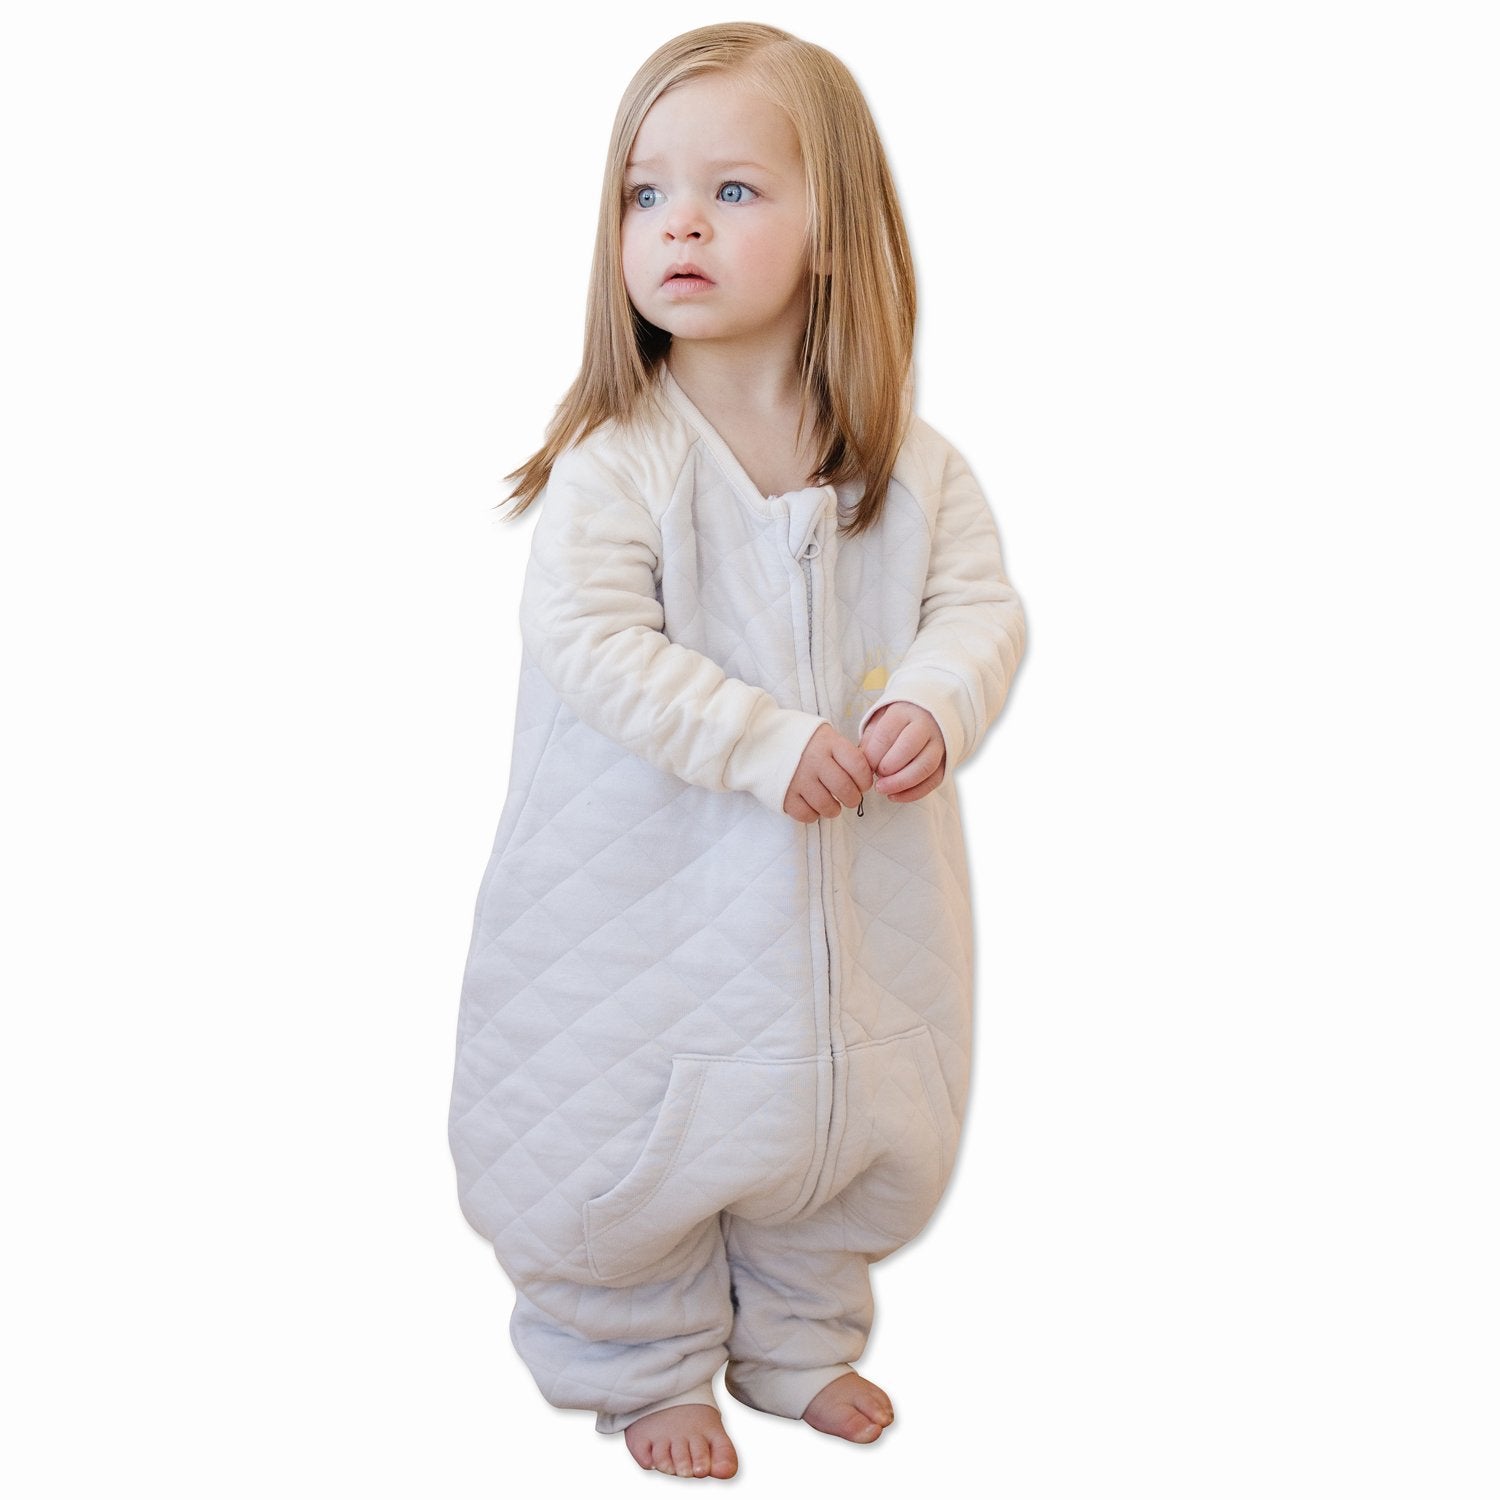 Baby Wearing Tealbee DREAMSIE Sunshine 1.2 TOG Sleep sack with sleeves and footies. Available from 12m to 4T.